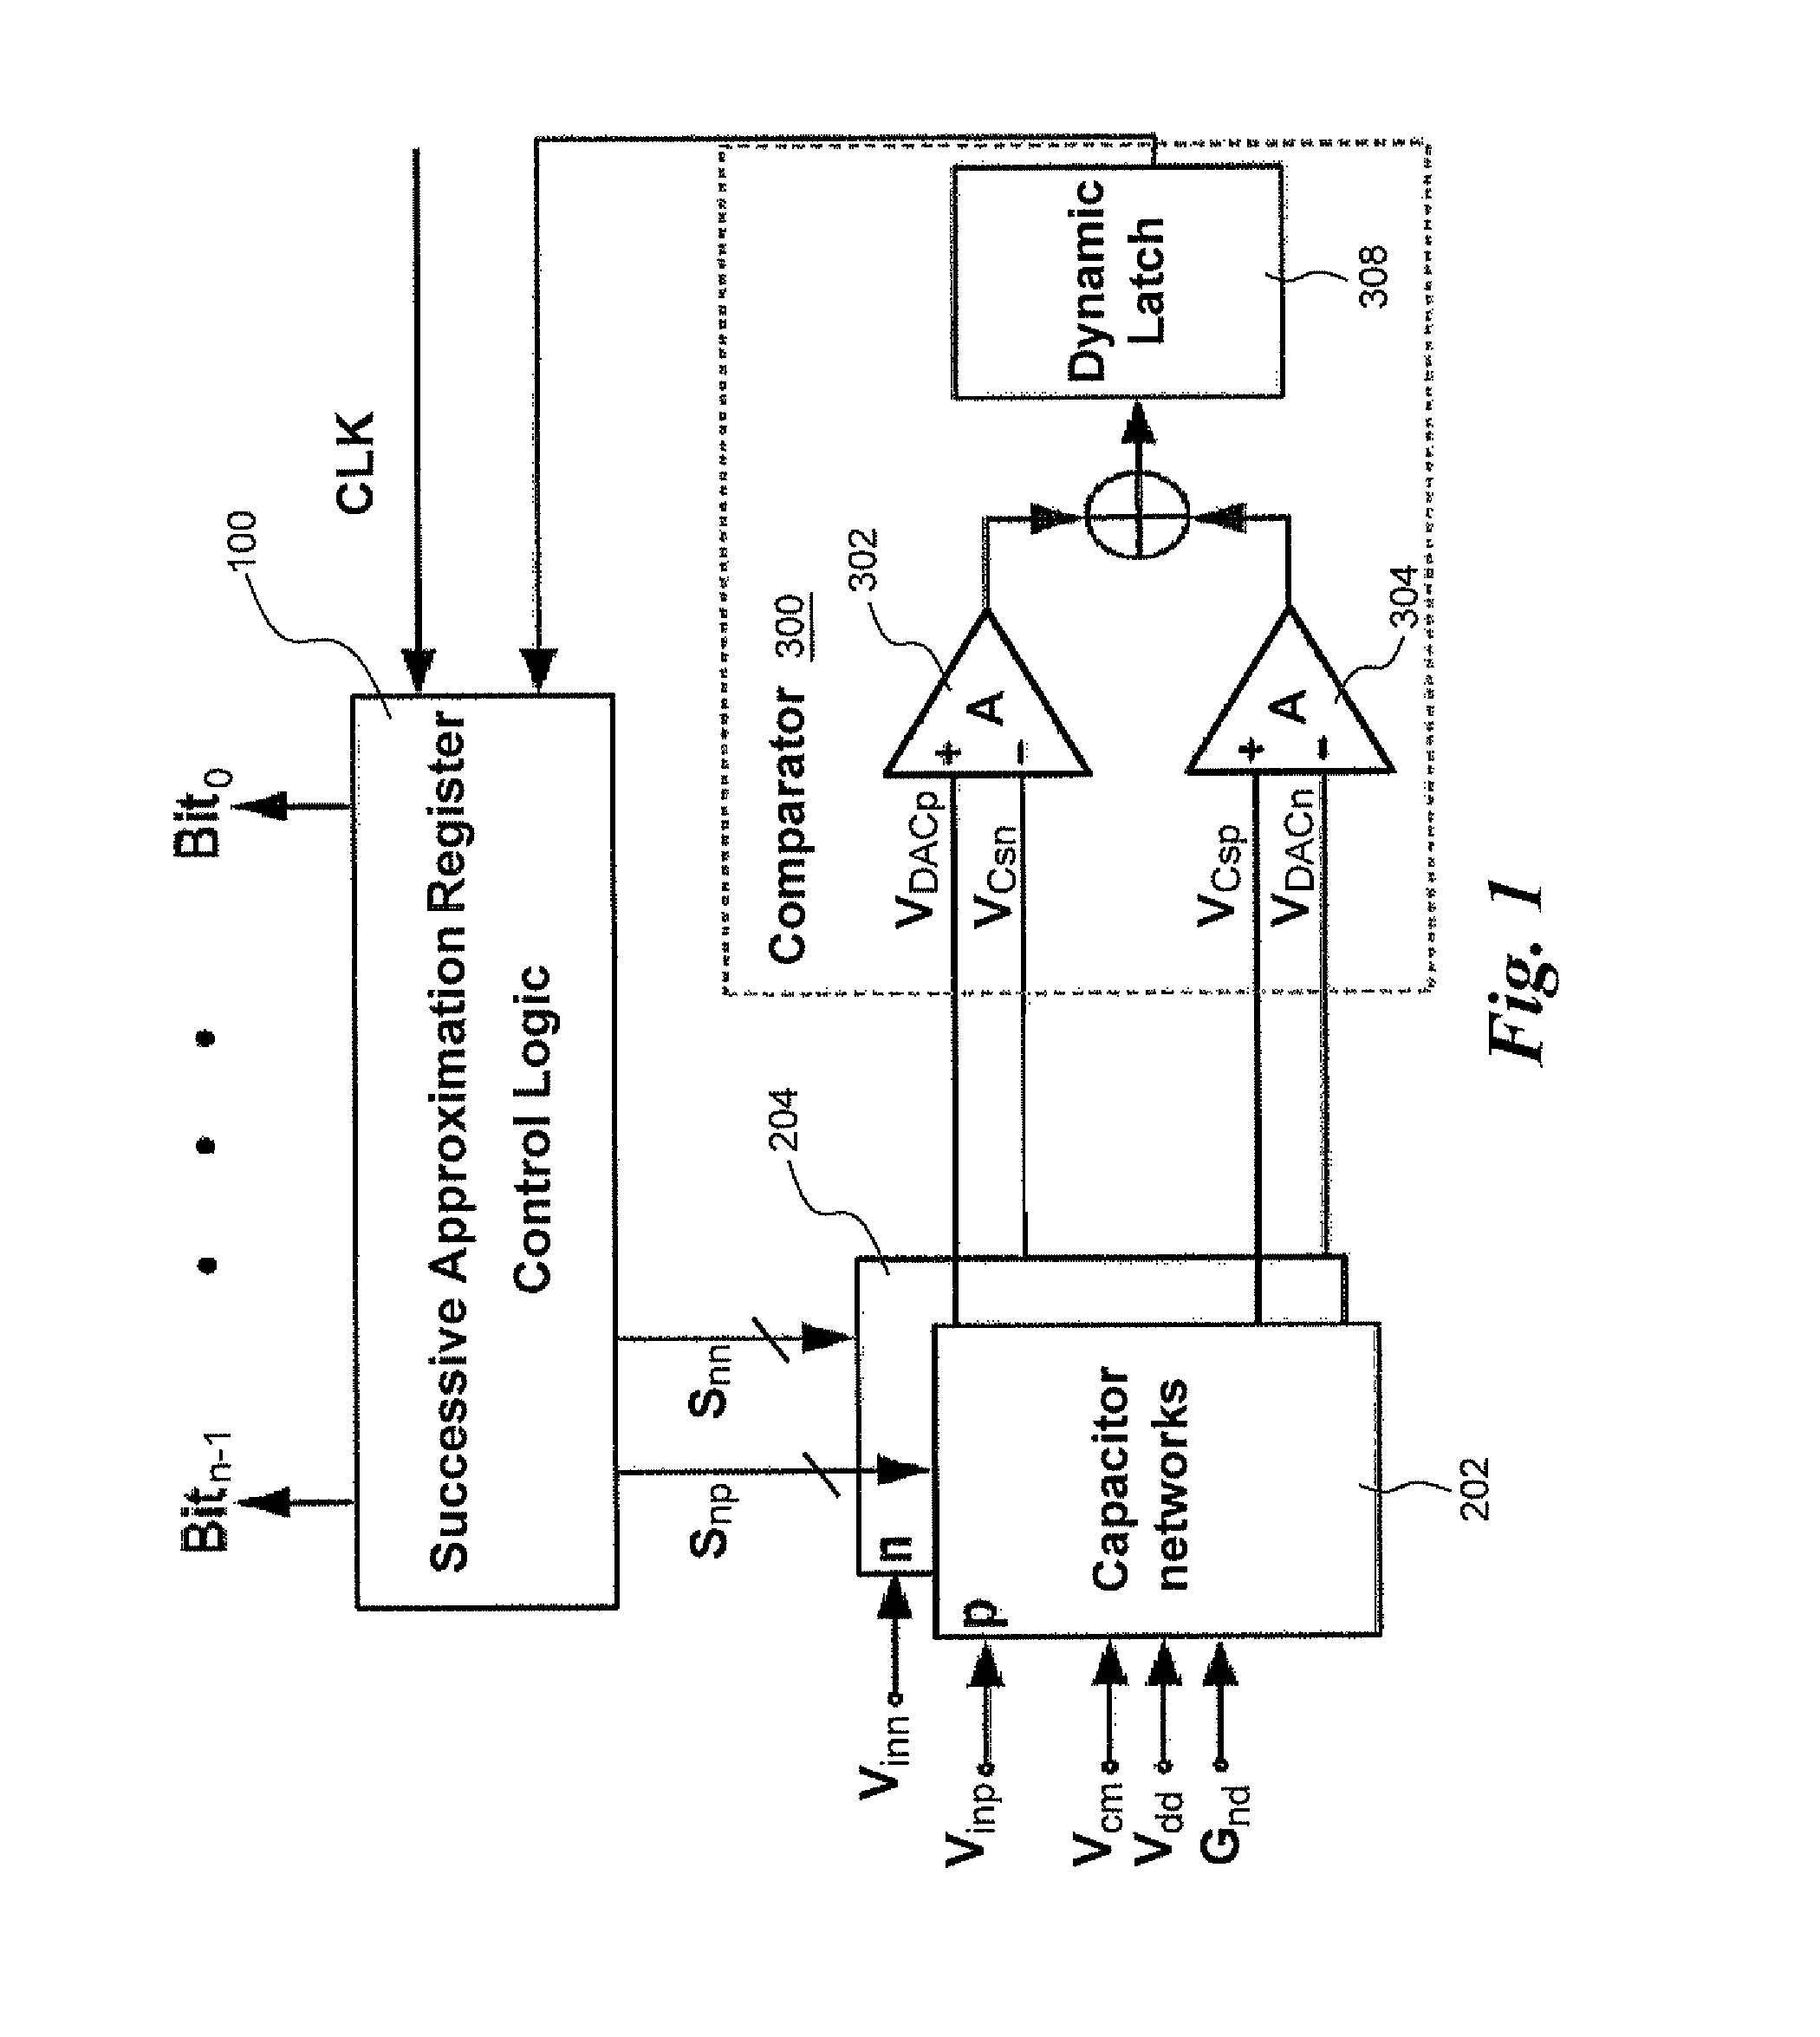 N-bits successive approximation register analog-to-digital converting circuit